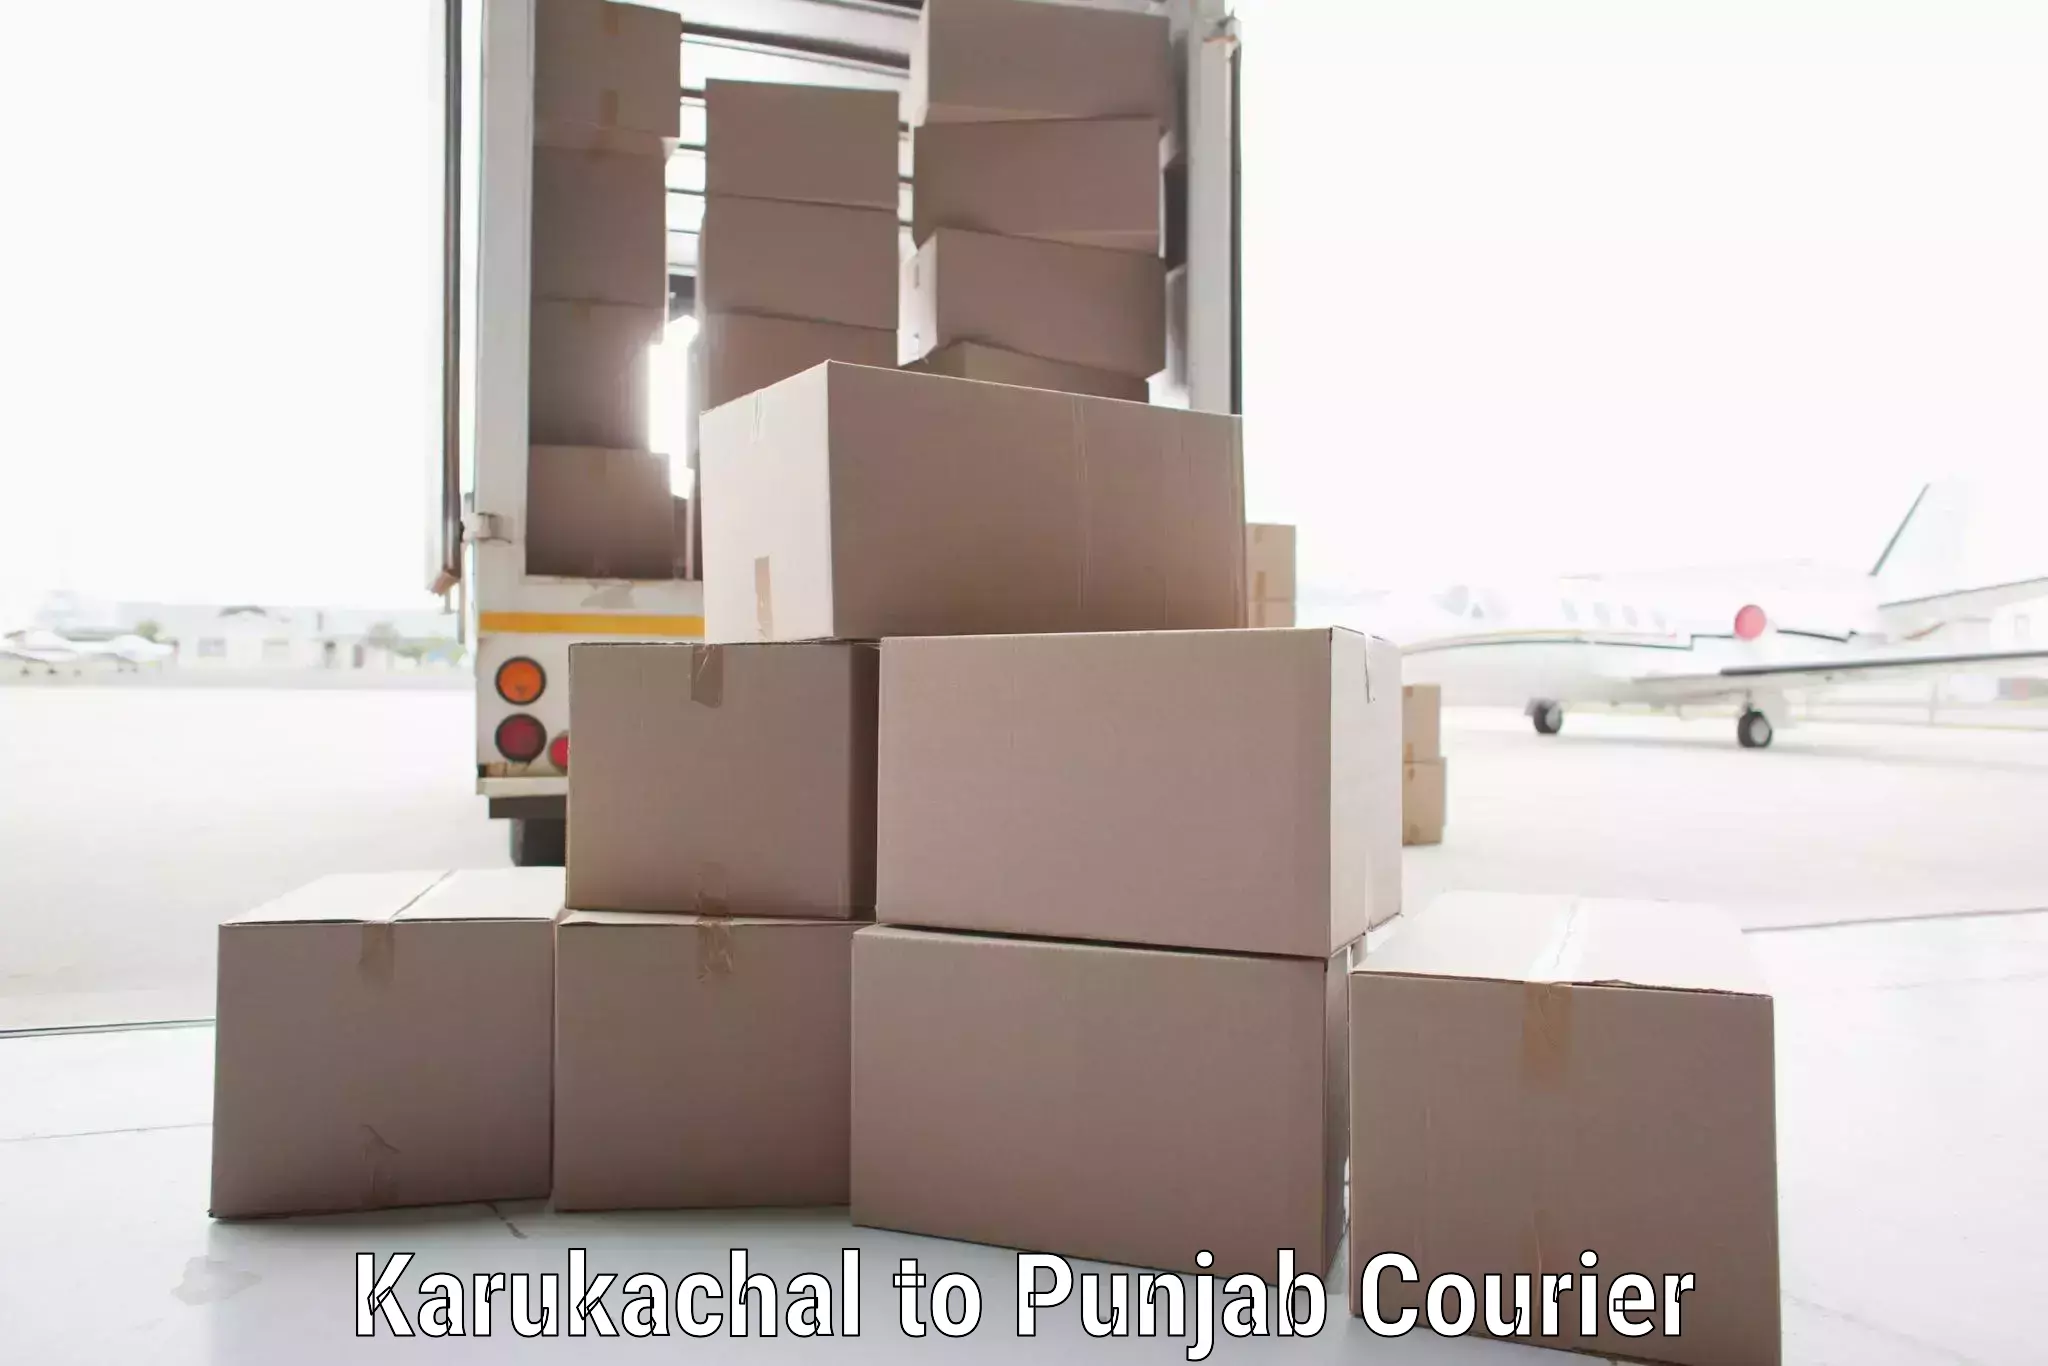 Full-service courier options Karukachal to Khanna